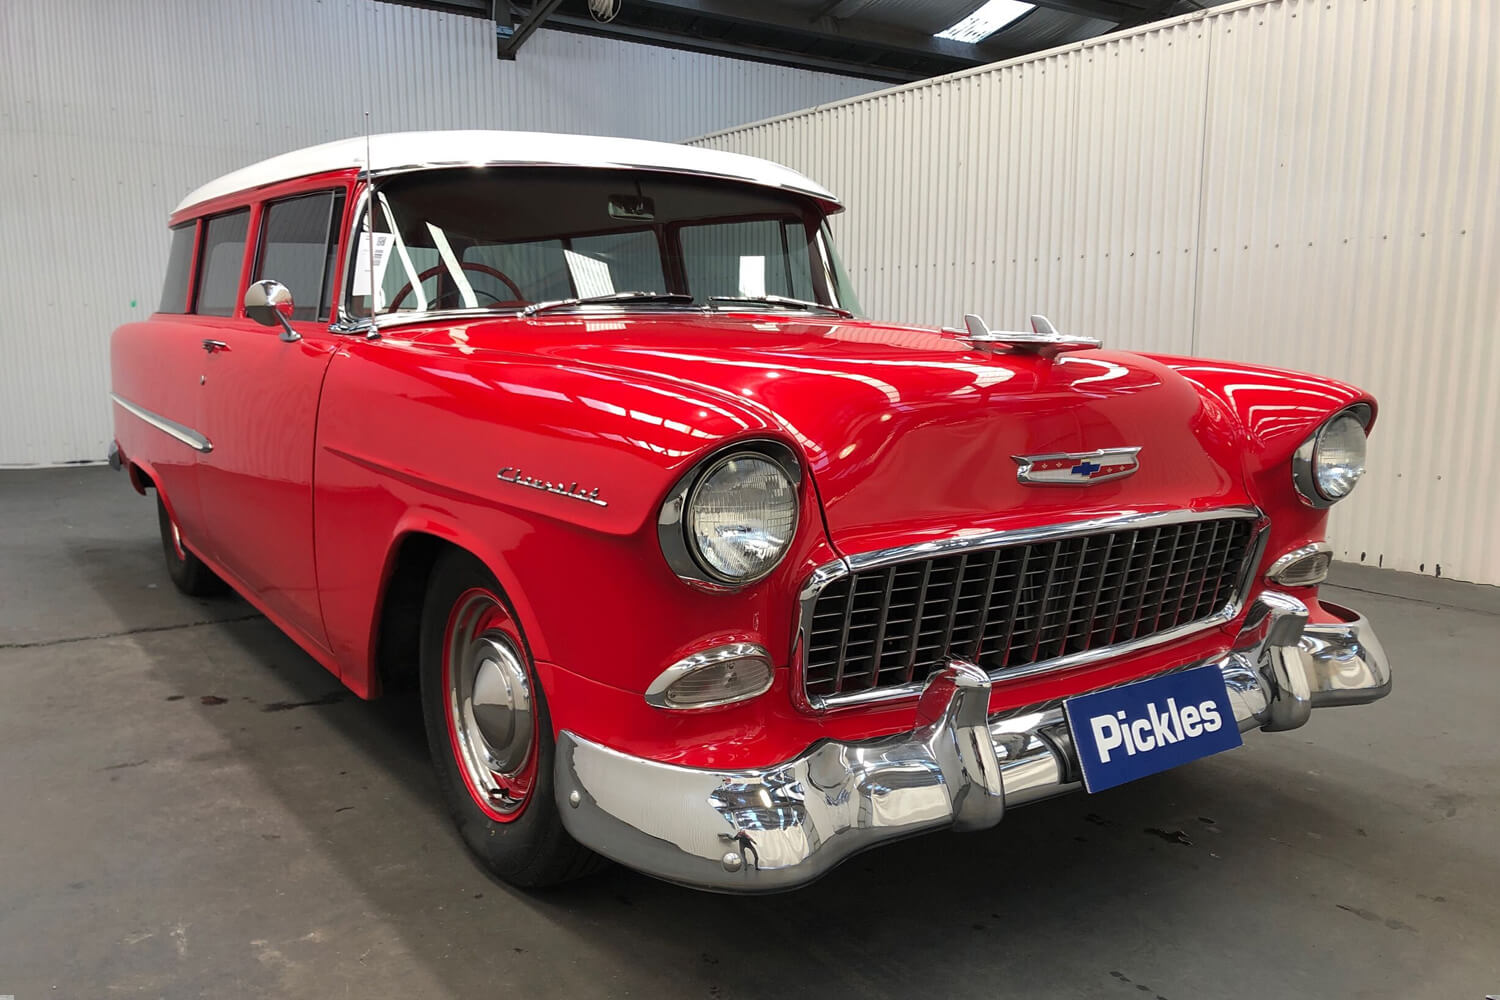 View a red 1955 Chevrolet 210 available via auction.